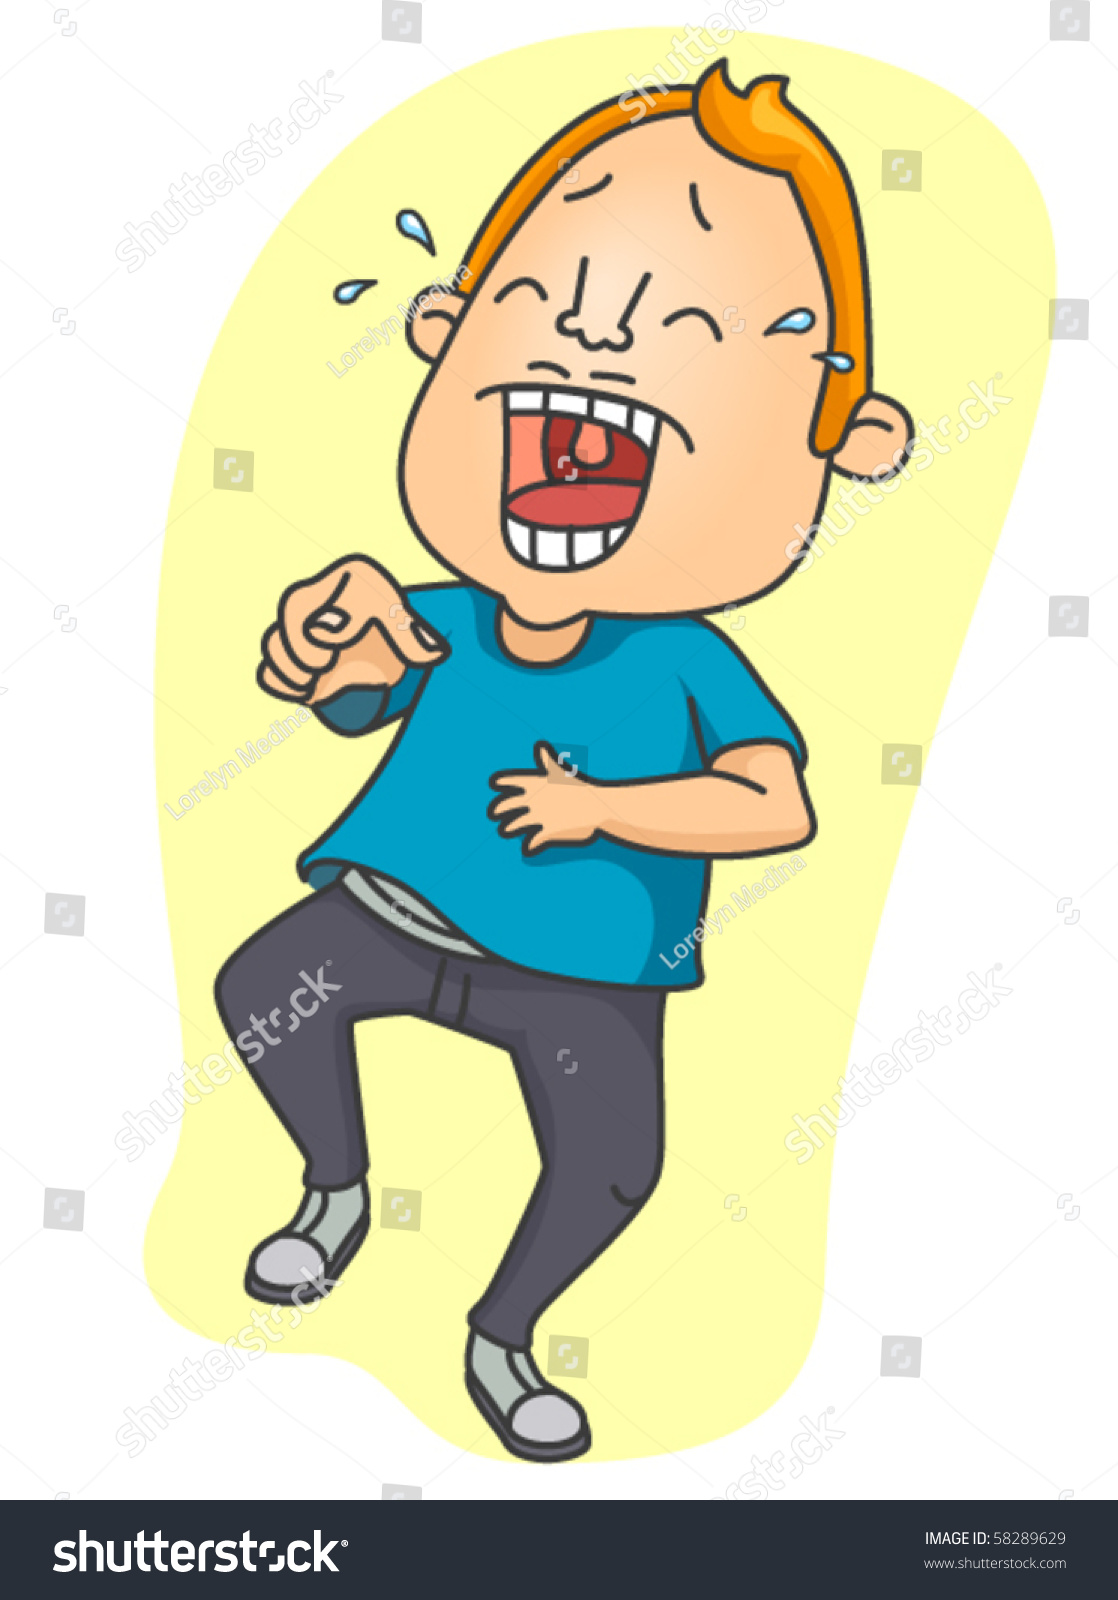 man laughing clipart - photo #49